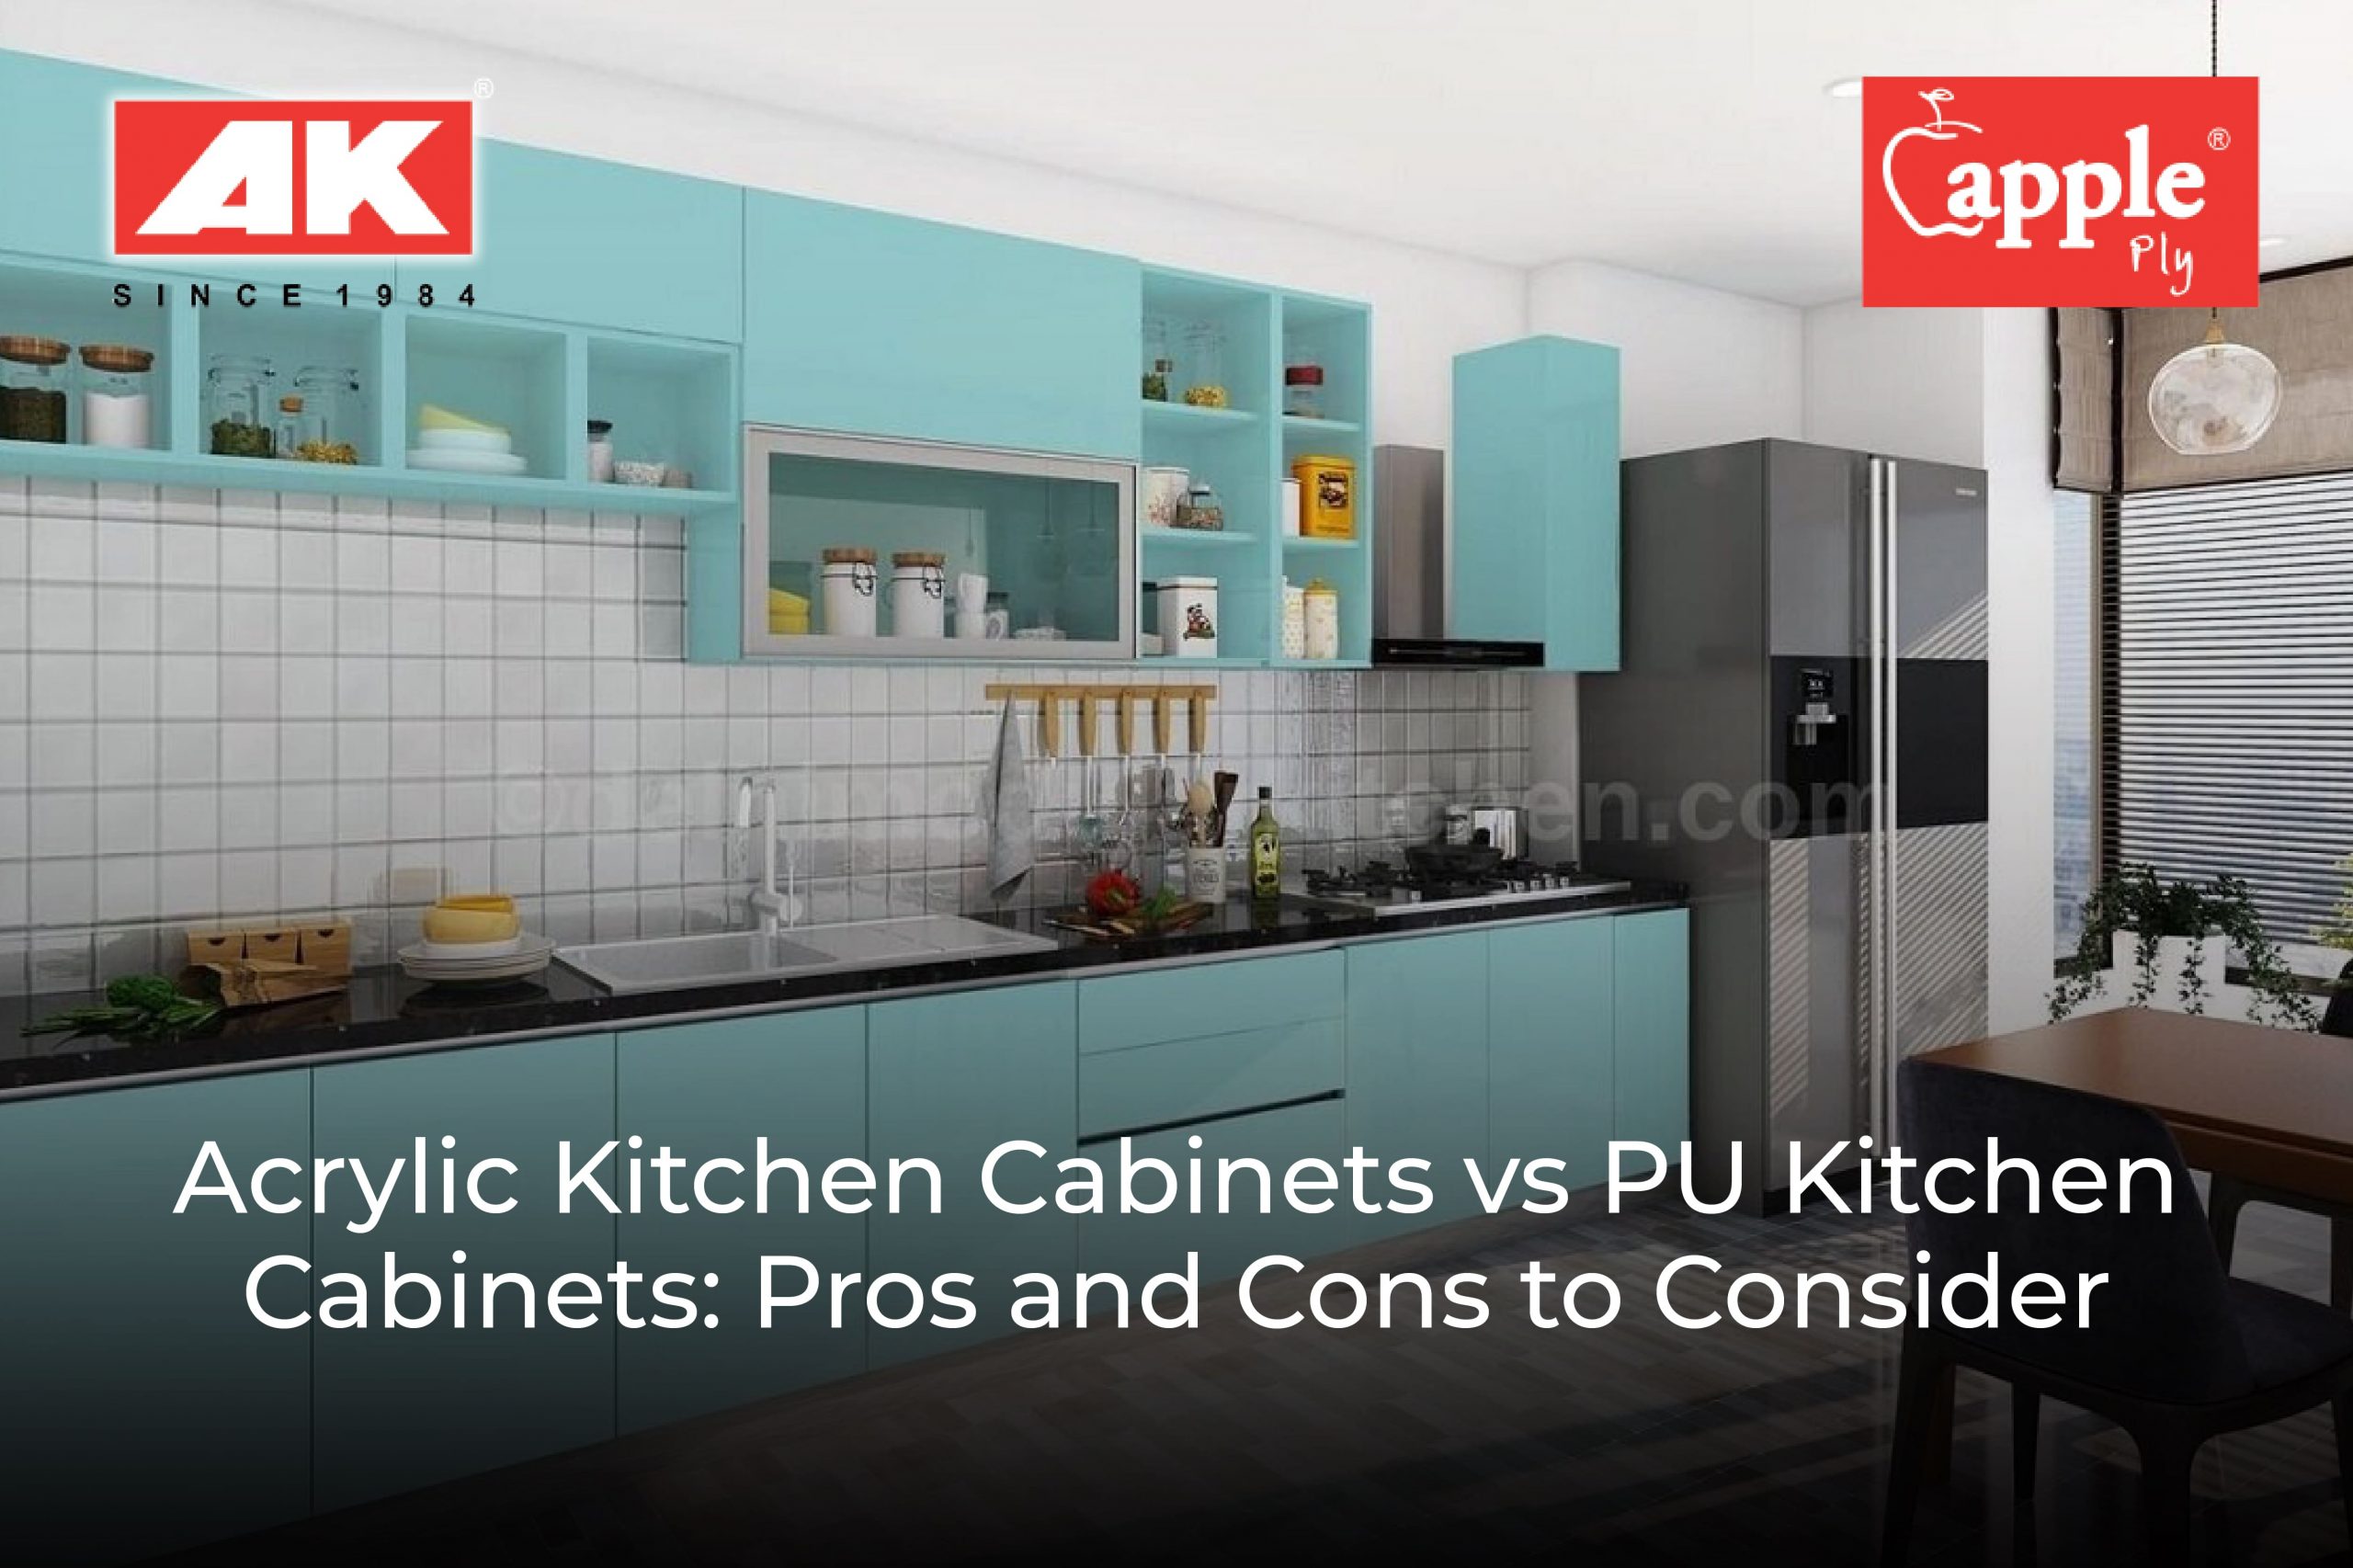 Acrylic Kitchen Cabinets: Features, Pros and Cons